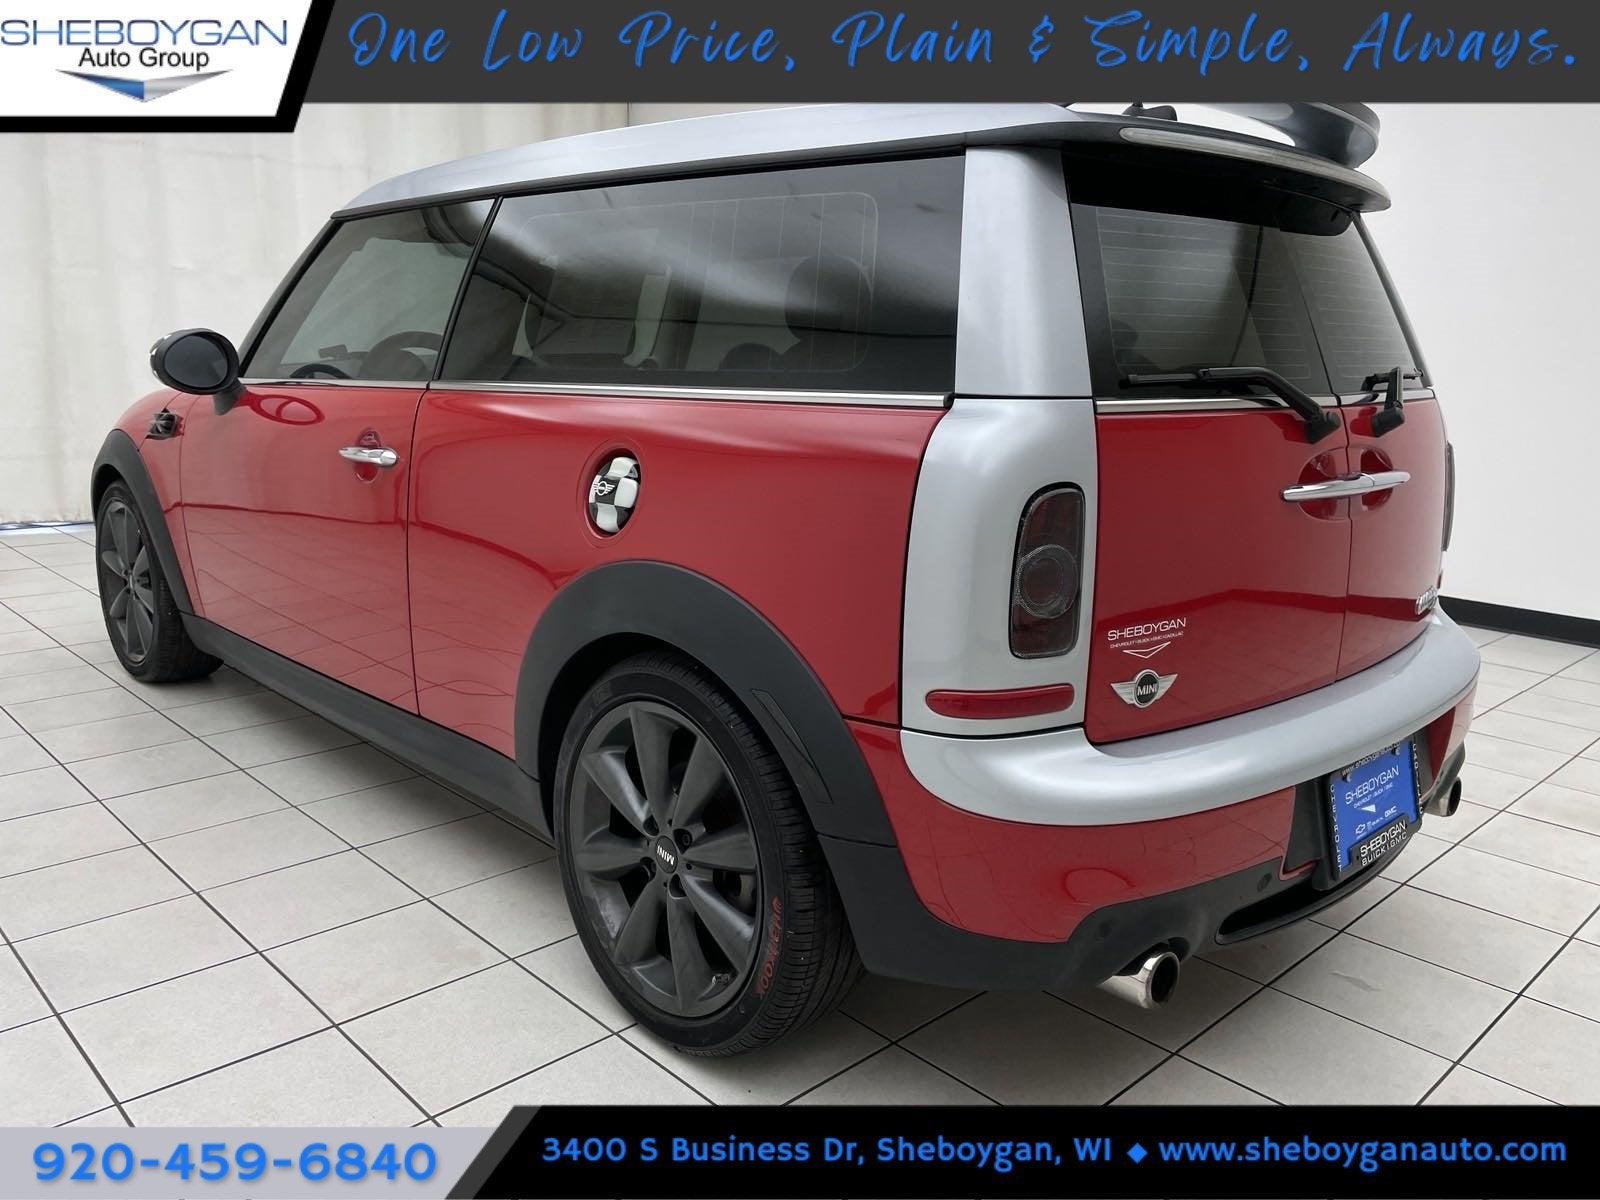 Used 2012 MINI Cooper S with VIN WMWZG3C5XCTY38984 for sale in Sheboygan, WI